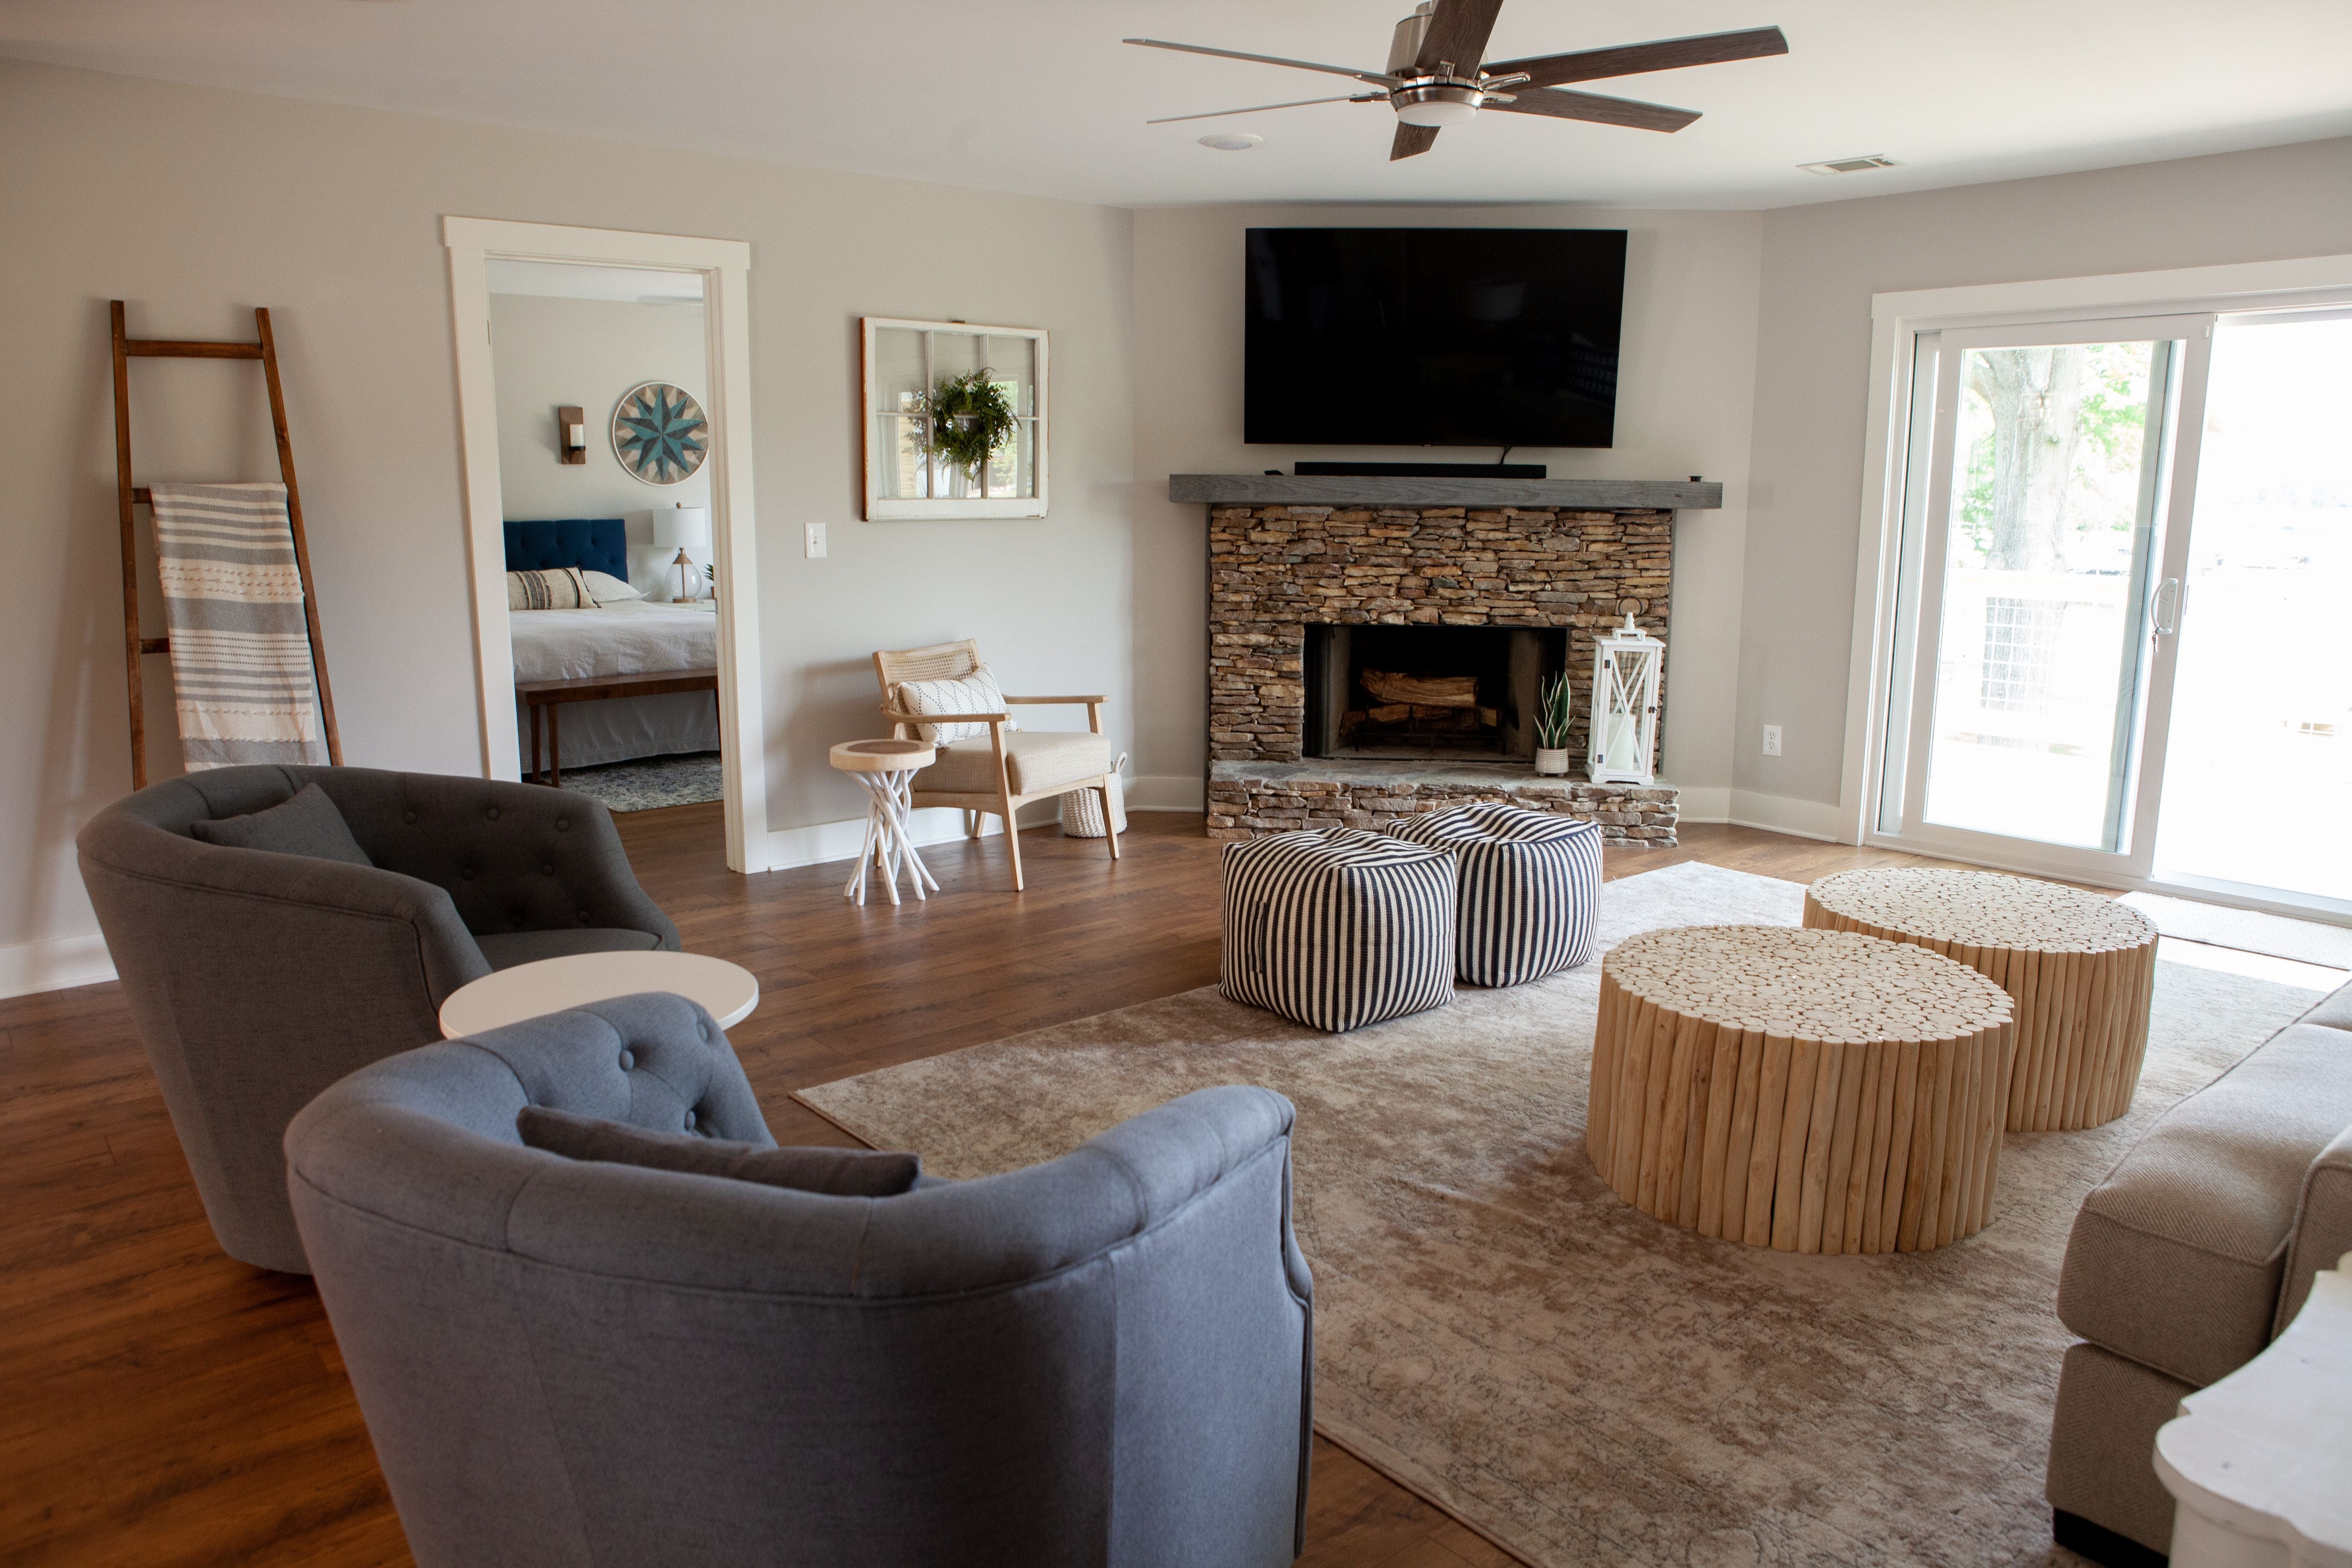 Living Room with Stone Fireplace in Remodeled Home | PAXISgroup Custom Home Builders in GA